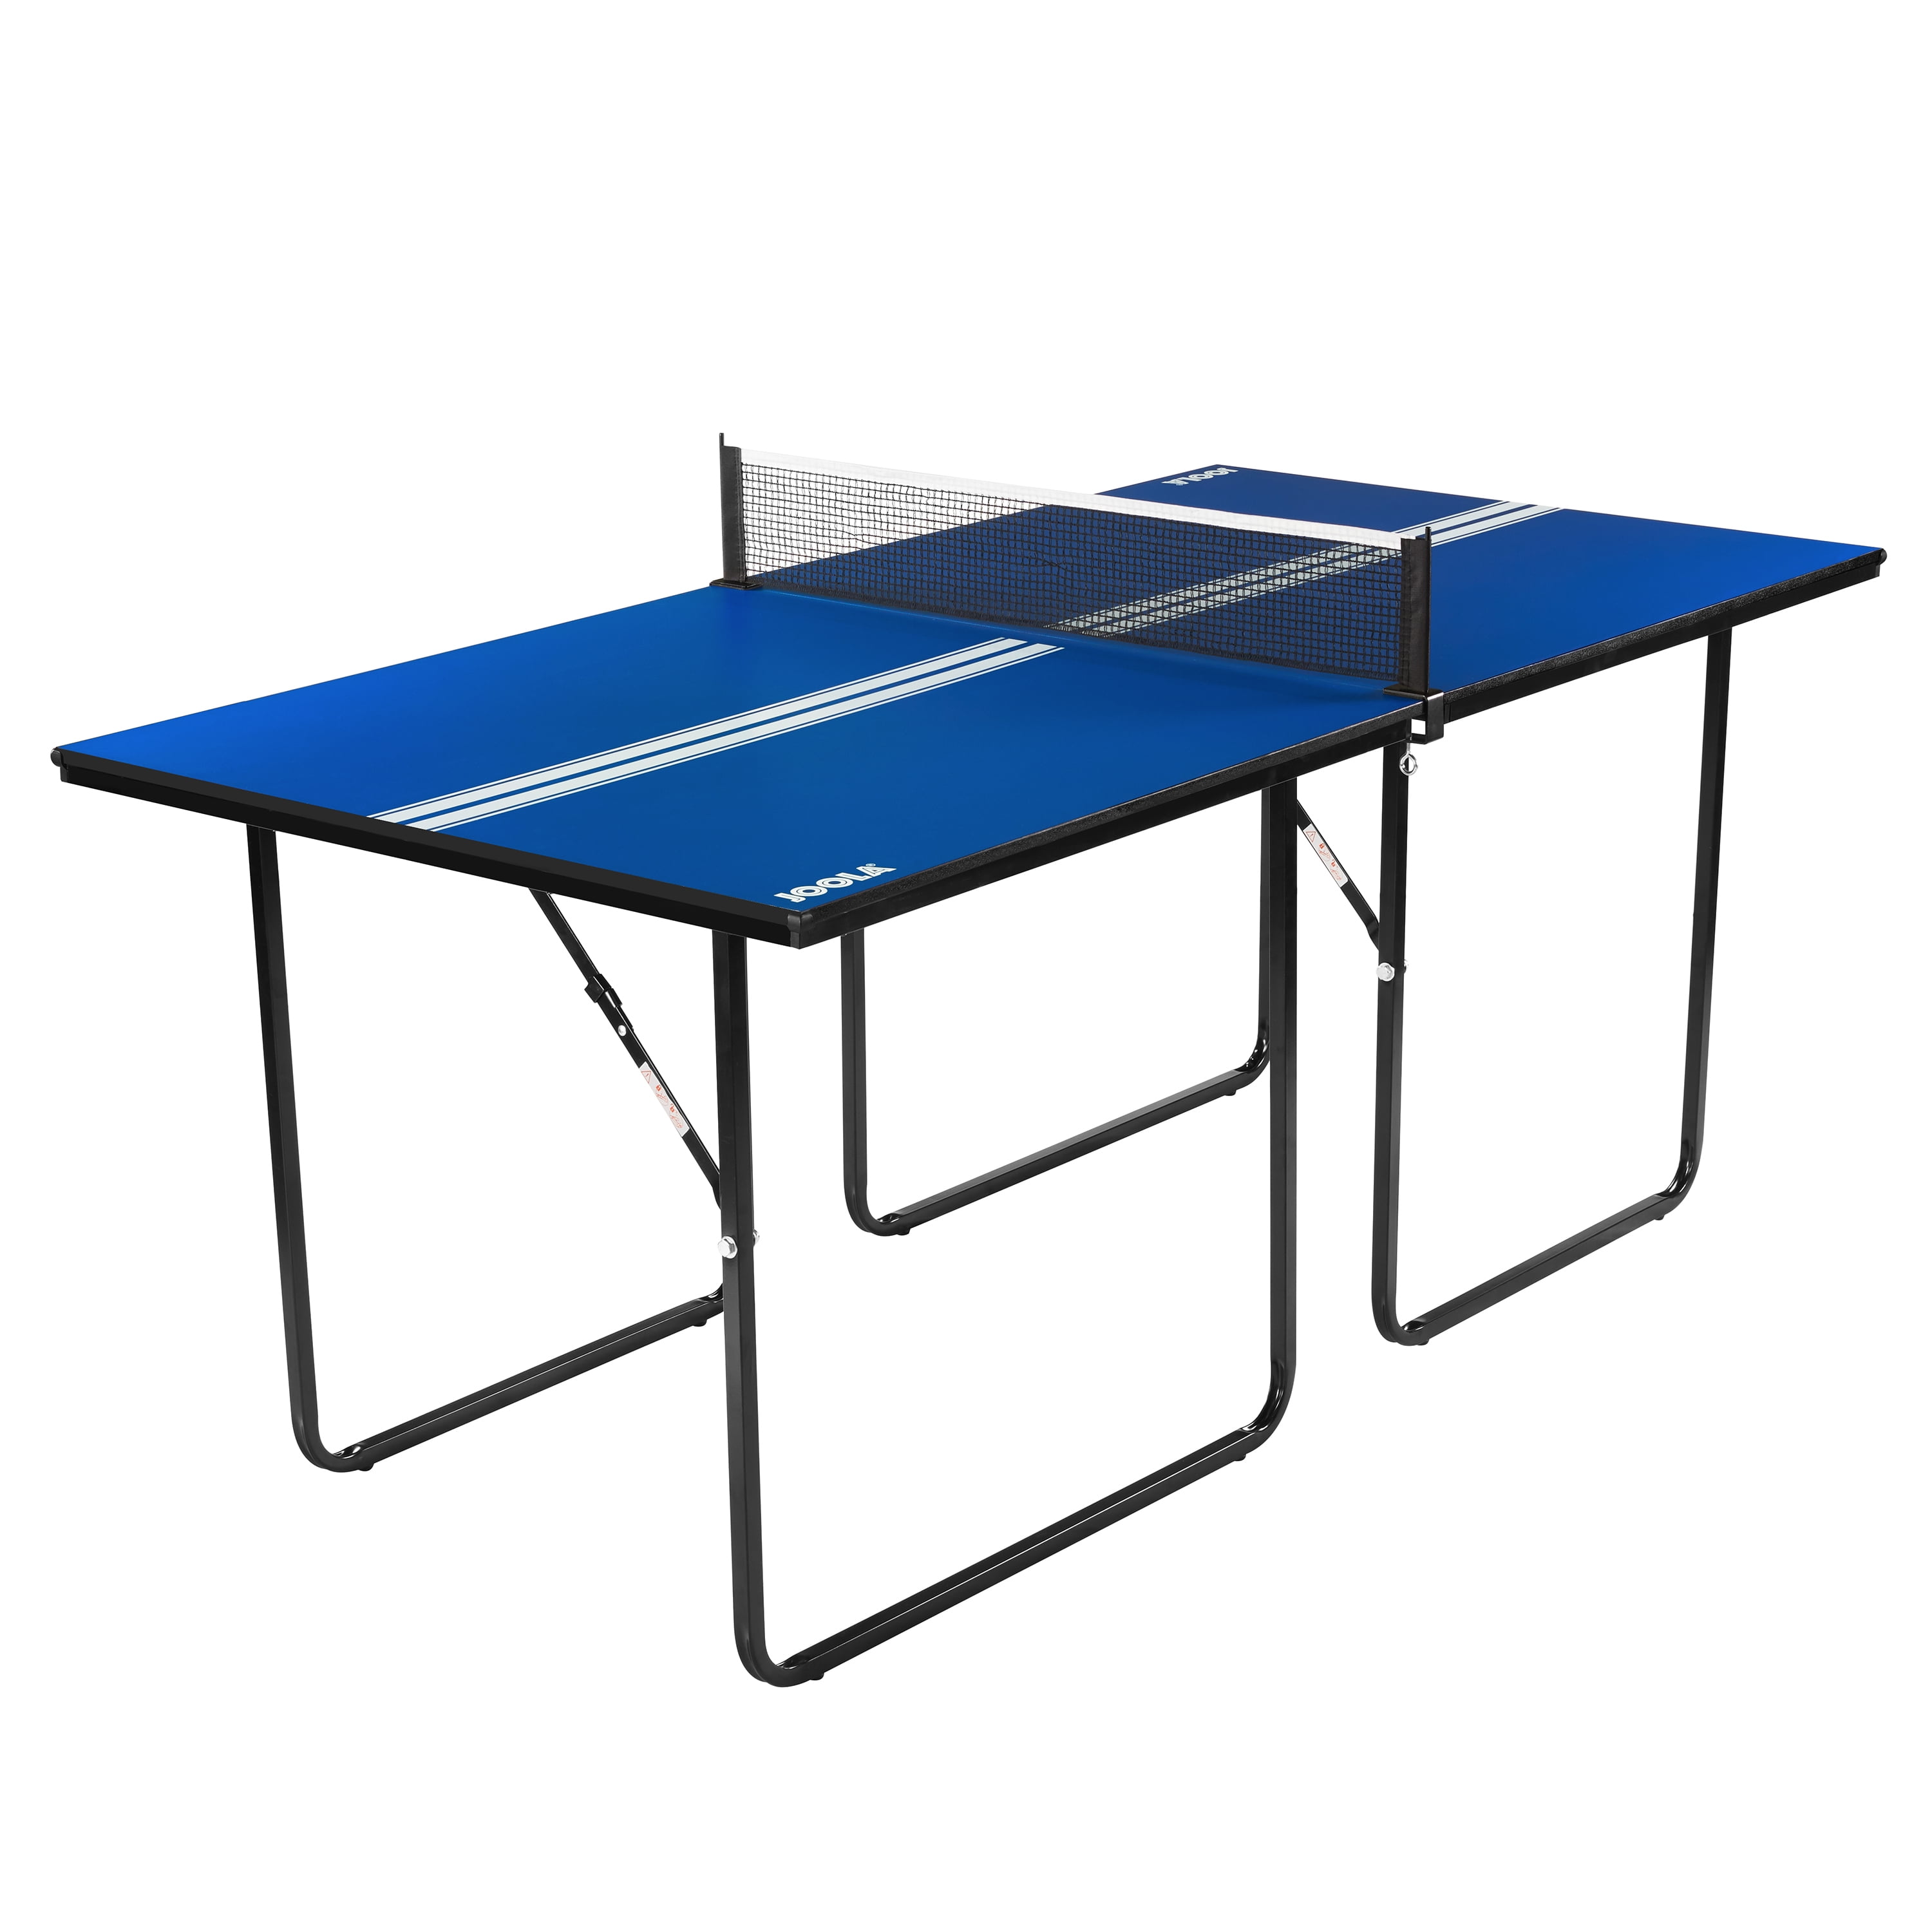 Mid Size Table Tennis Ping Pong Table for Small Spaces and Apartments with Net 